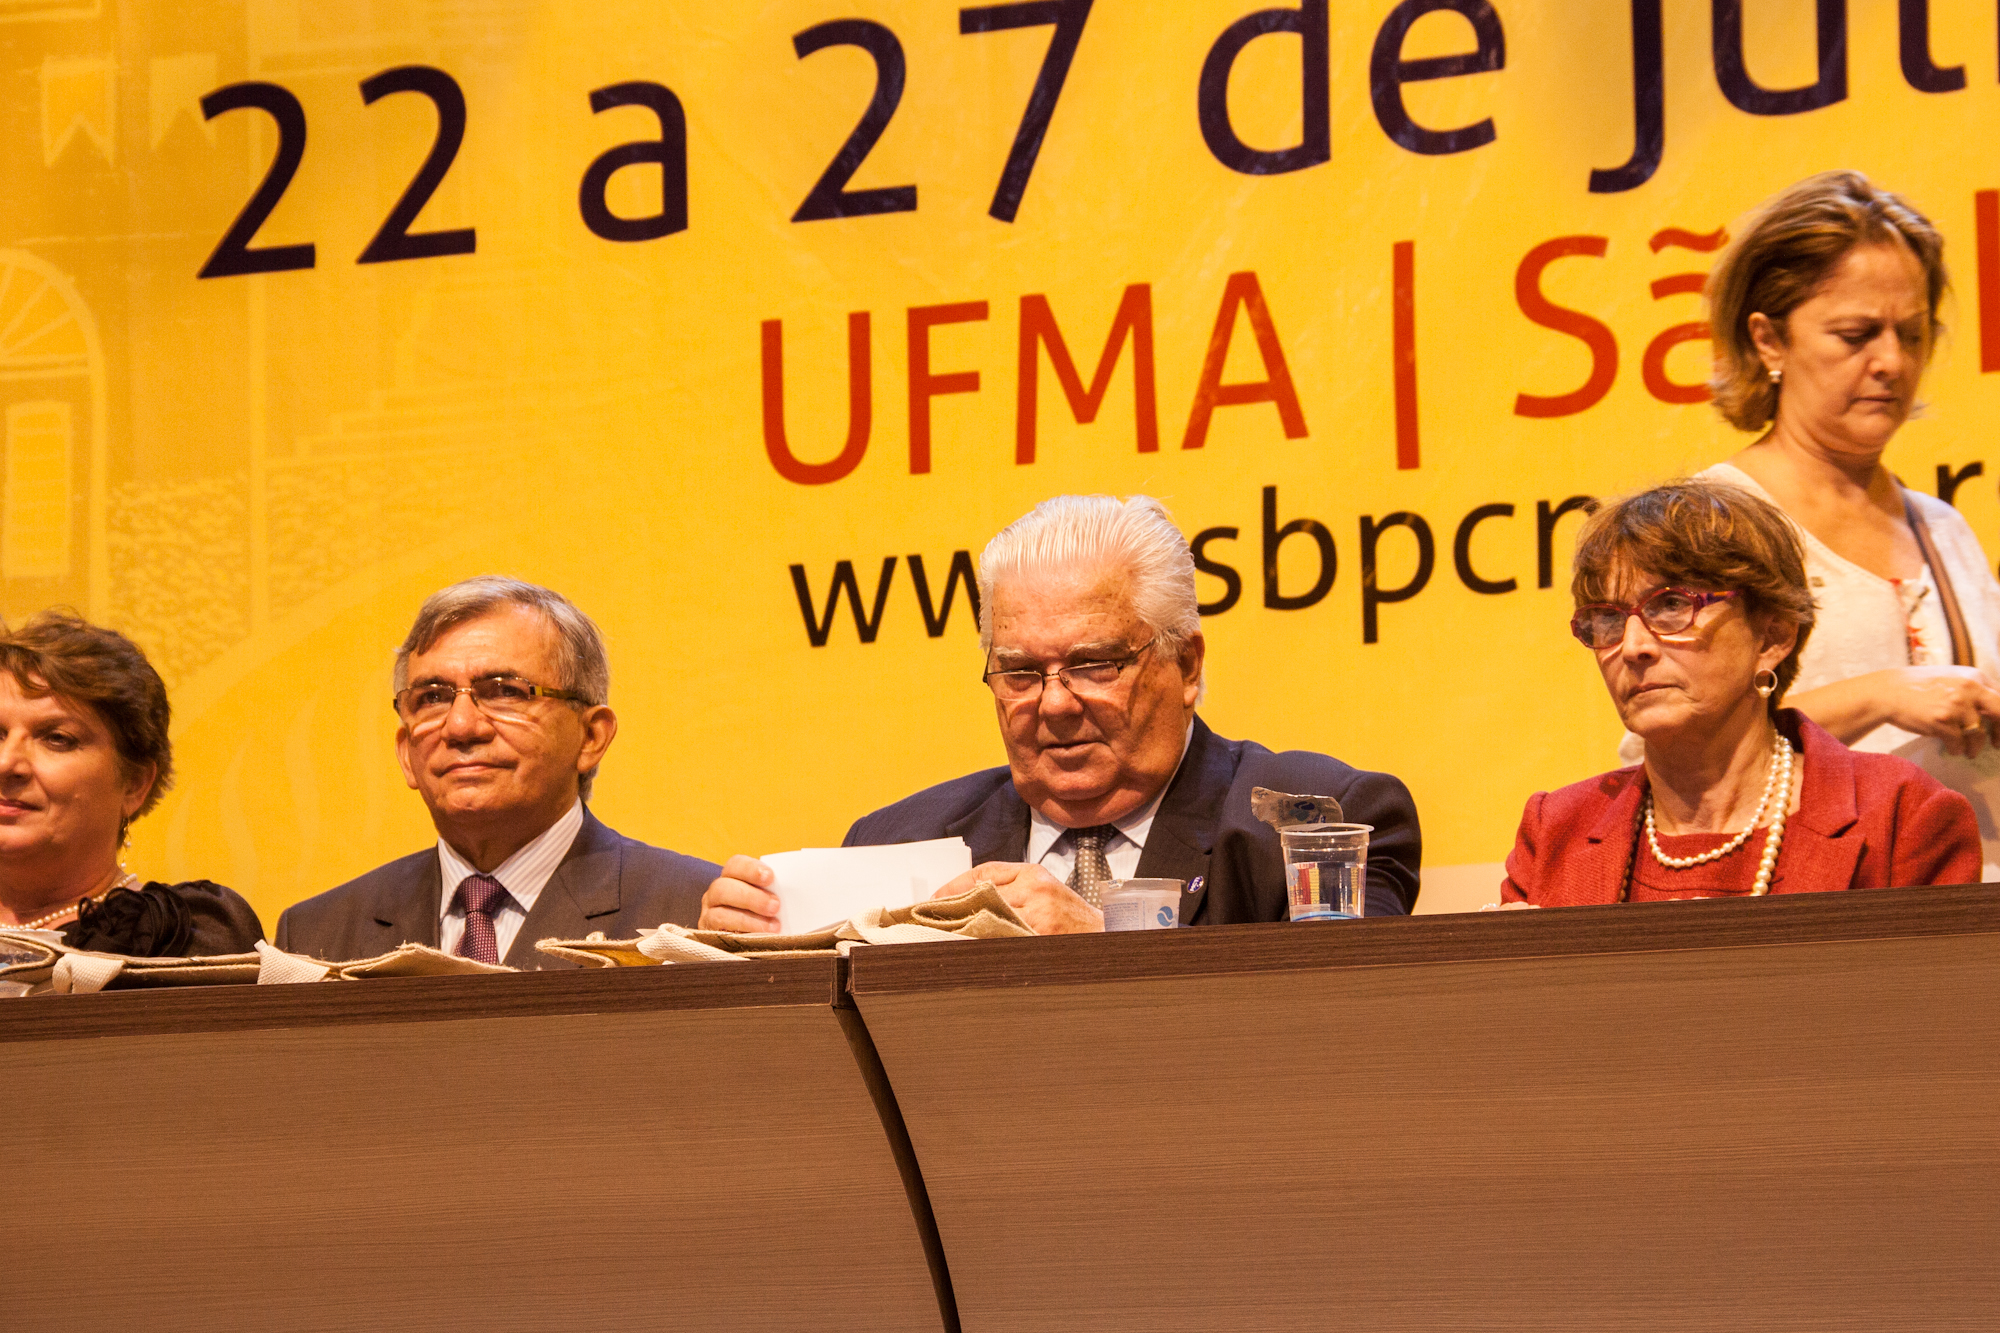 four people standing at a panel during a speech